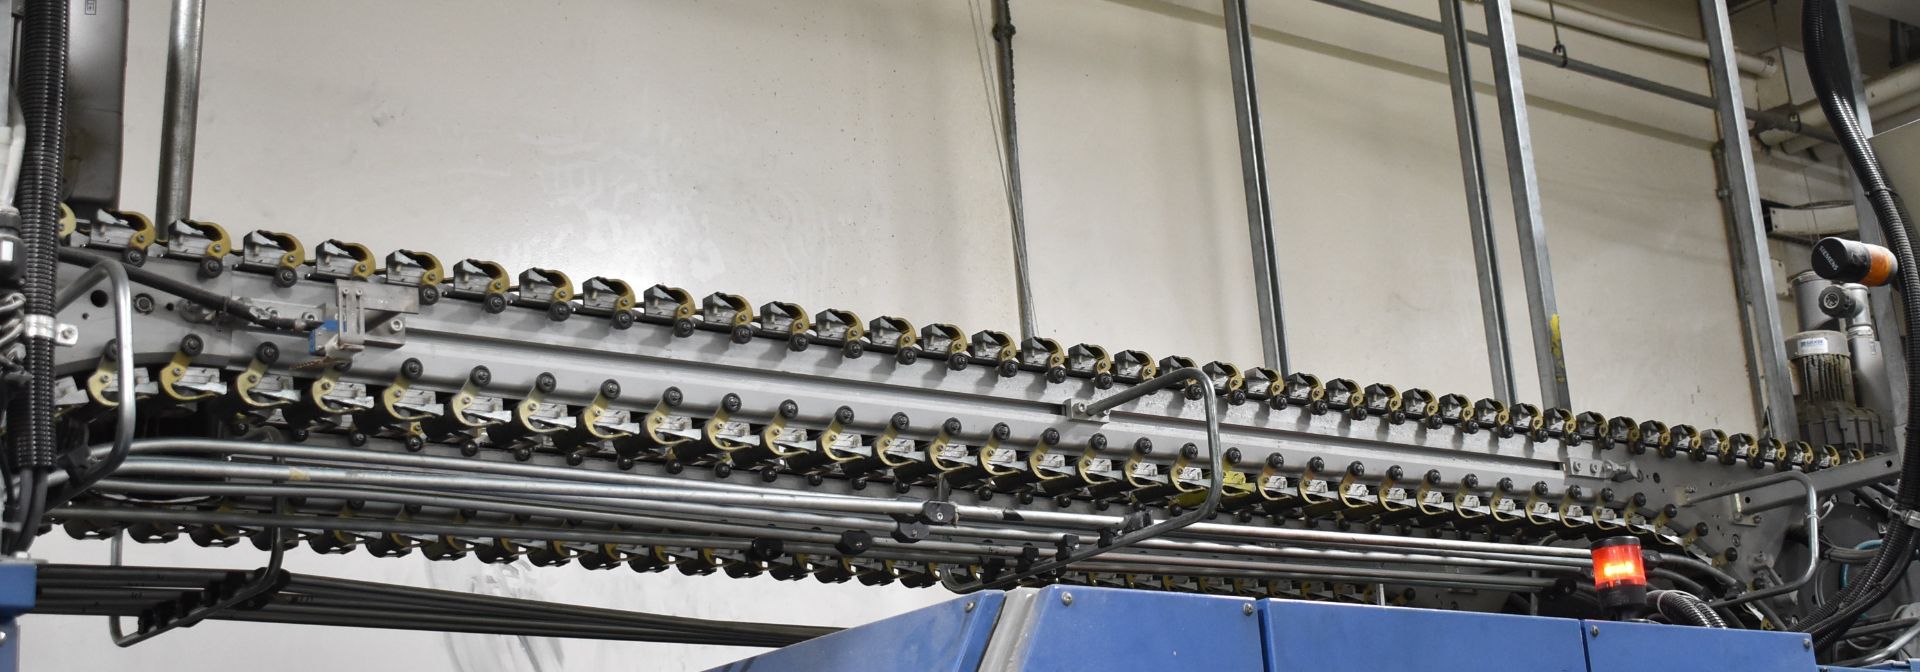 SCHUR APPROX. 150' OVERHEAD TRANSPORT CONVEYOR SYSTEM WITH (4) OVERHEAD DROP STATIONS, (2) CABINET- - Image 8 of 16